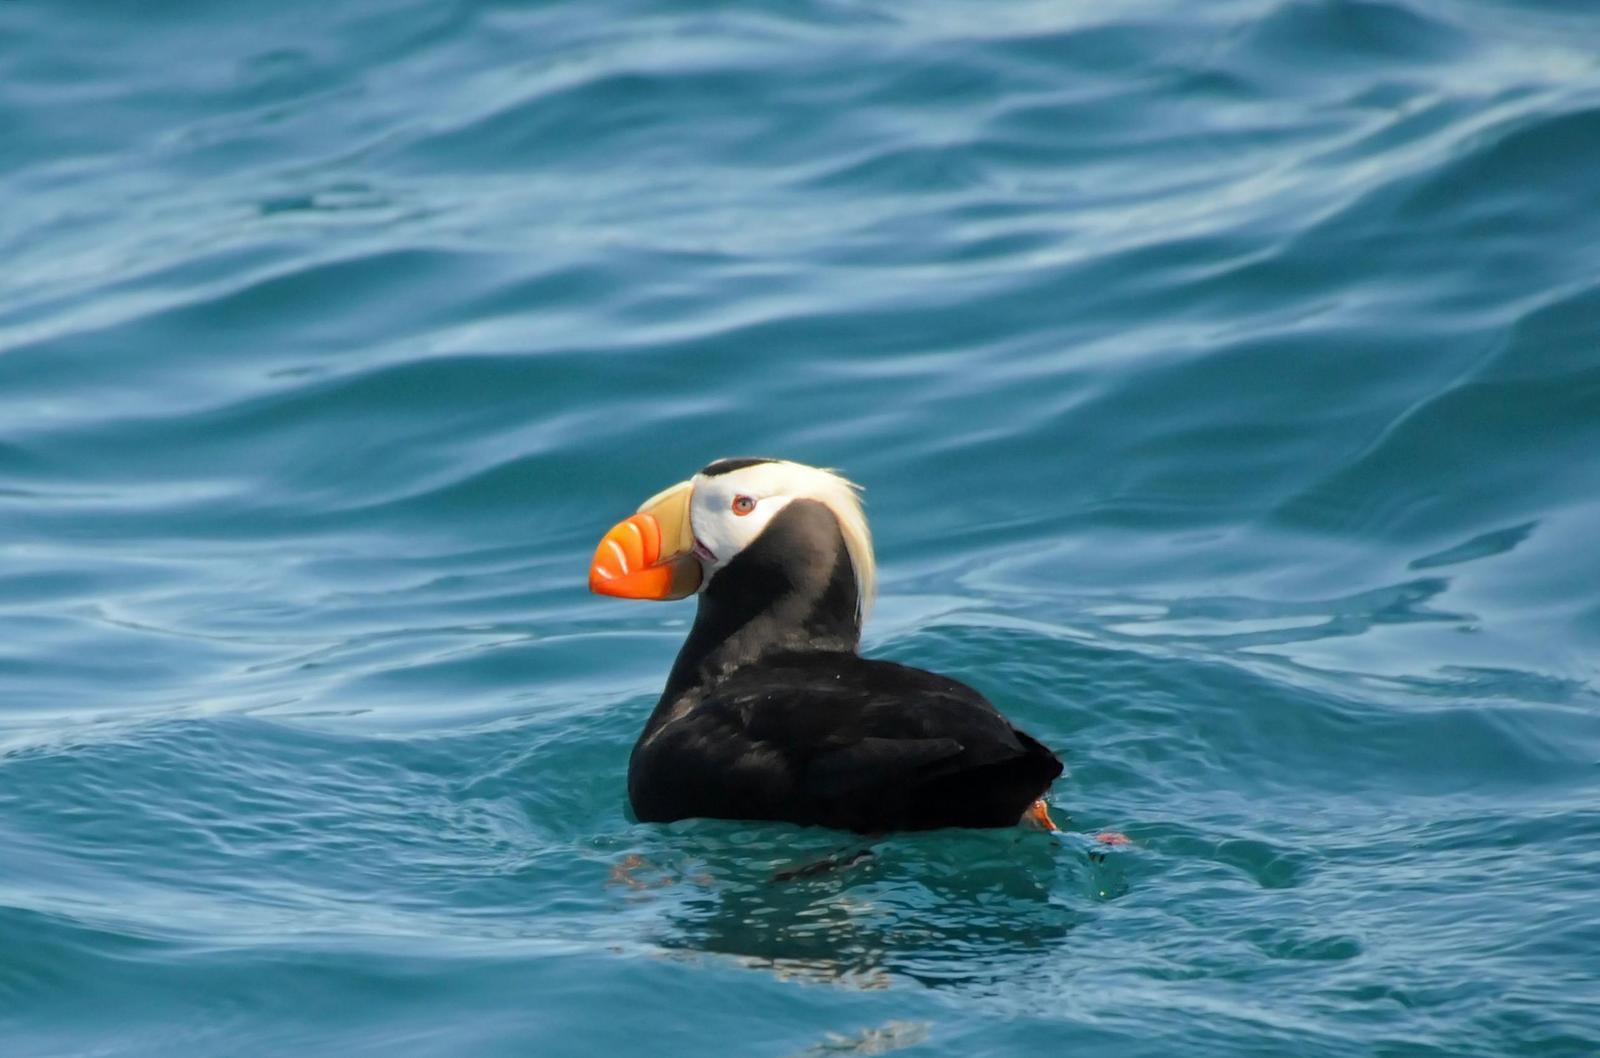 Tufted Puffin Photo by Steven Mlodinow